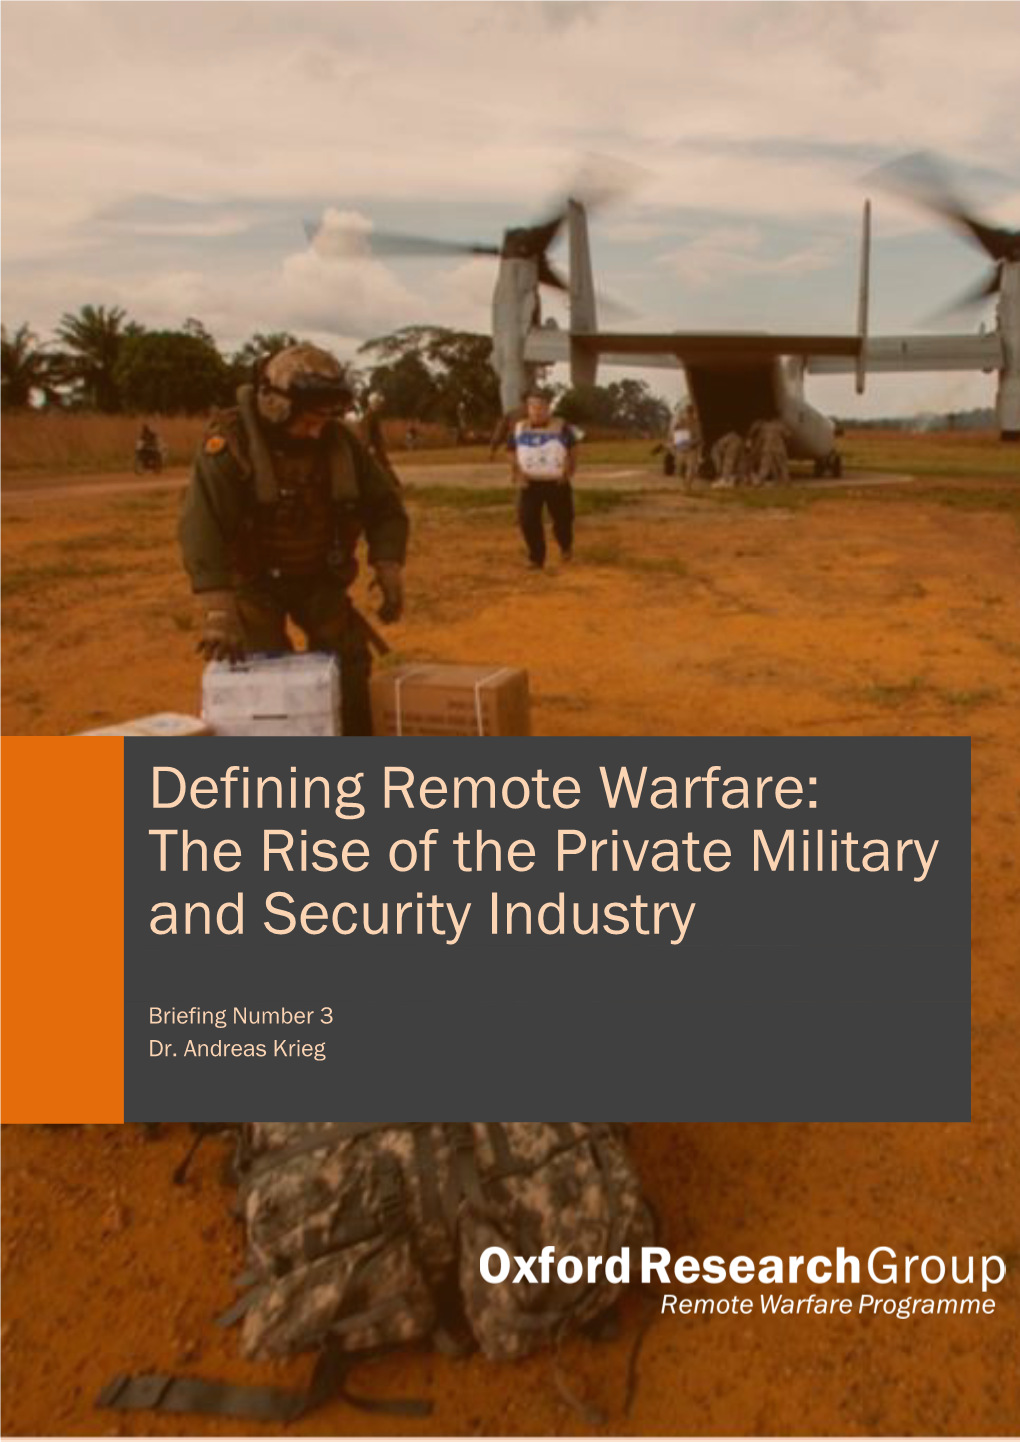 The Rise of the Private Military and Security Industry